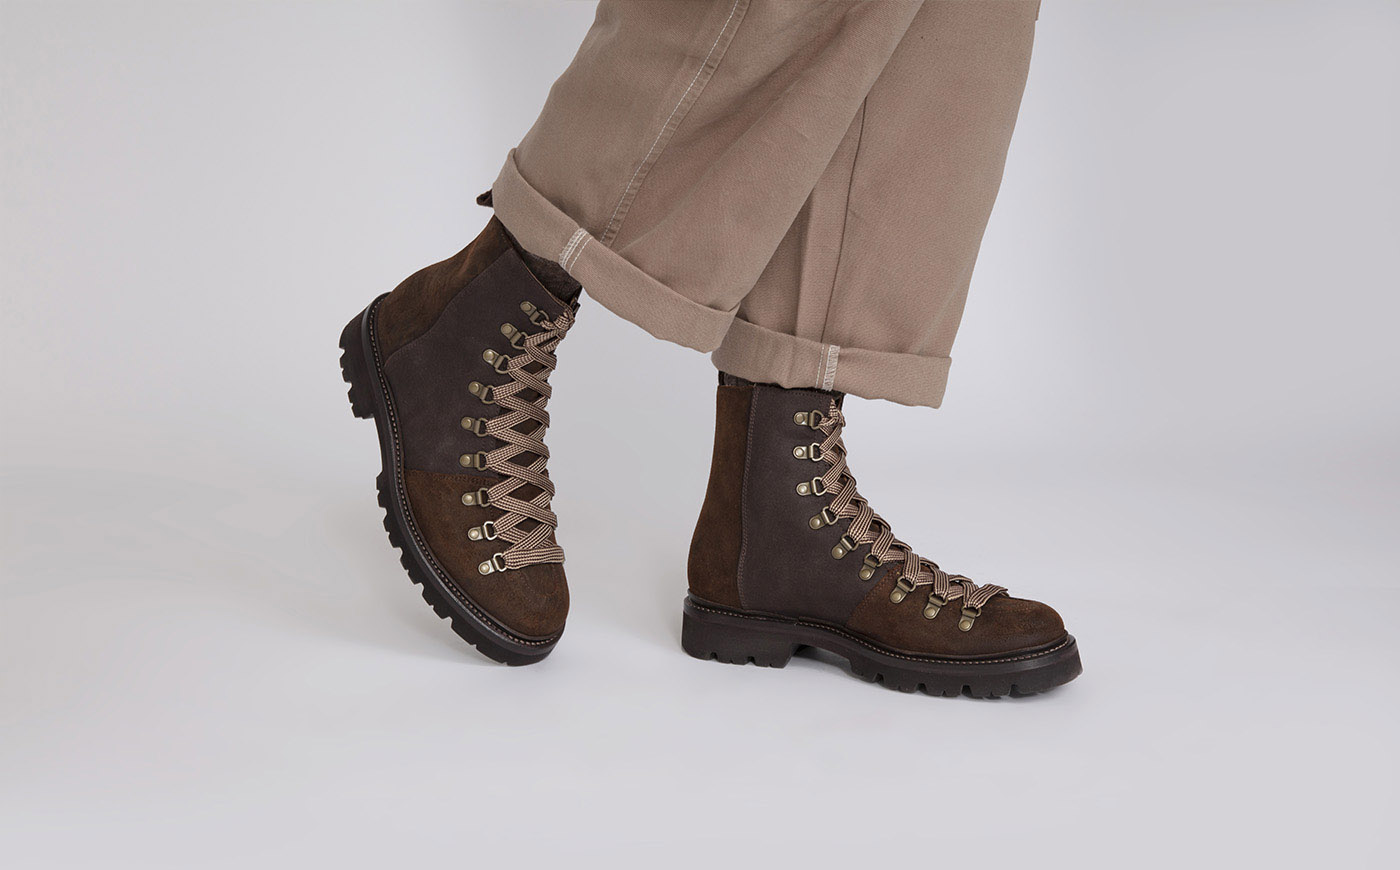 Brady | Mens Hiker Boots in Brown Waxy Leather | Grenson